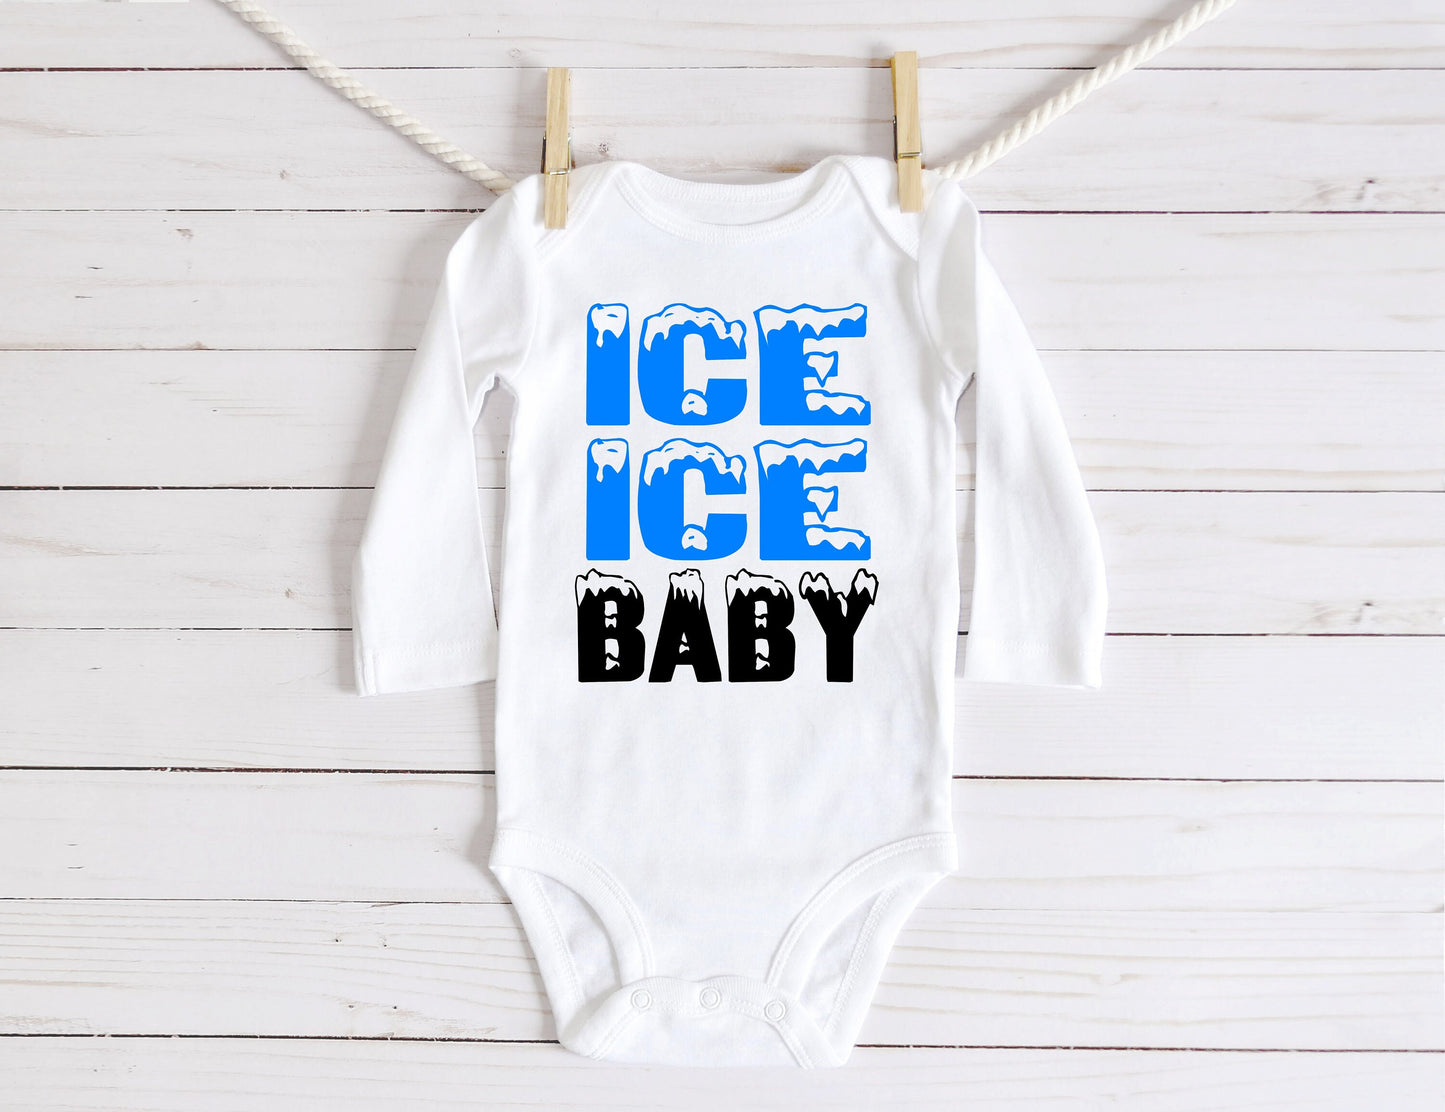 Ice Ice Baby Bodysuit - ice ice baby - ivf baby bodysuit - funny baby outfit - ivf baby gift - frozen embryo baby gift - baby shower gift